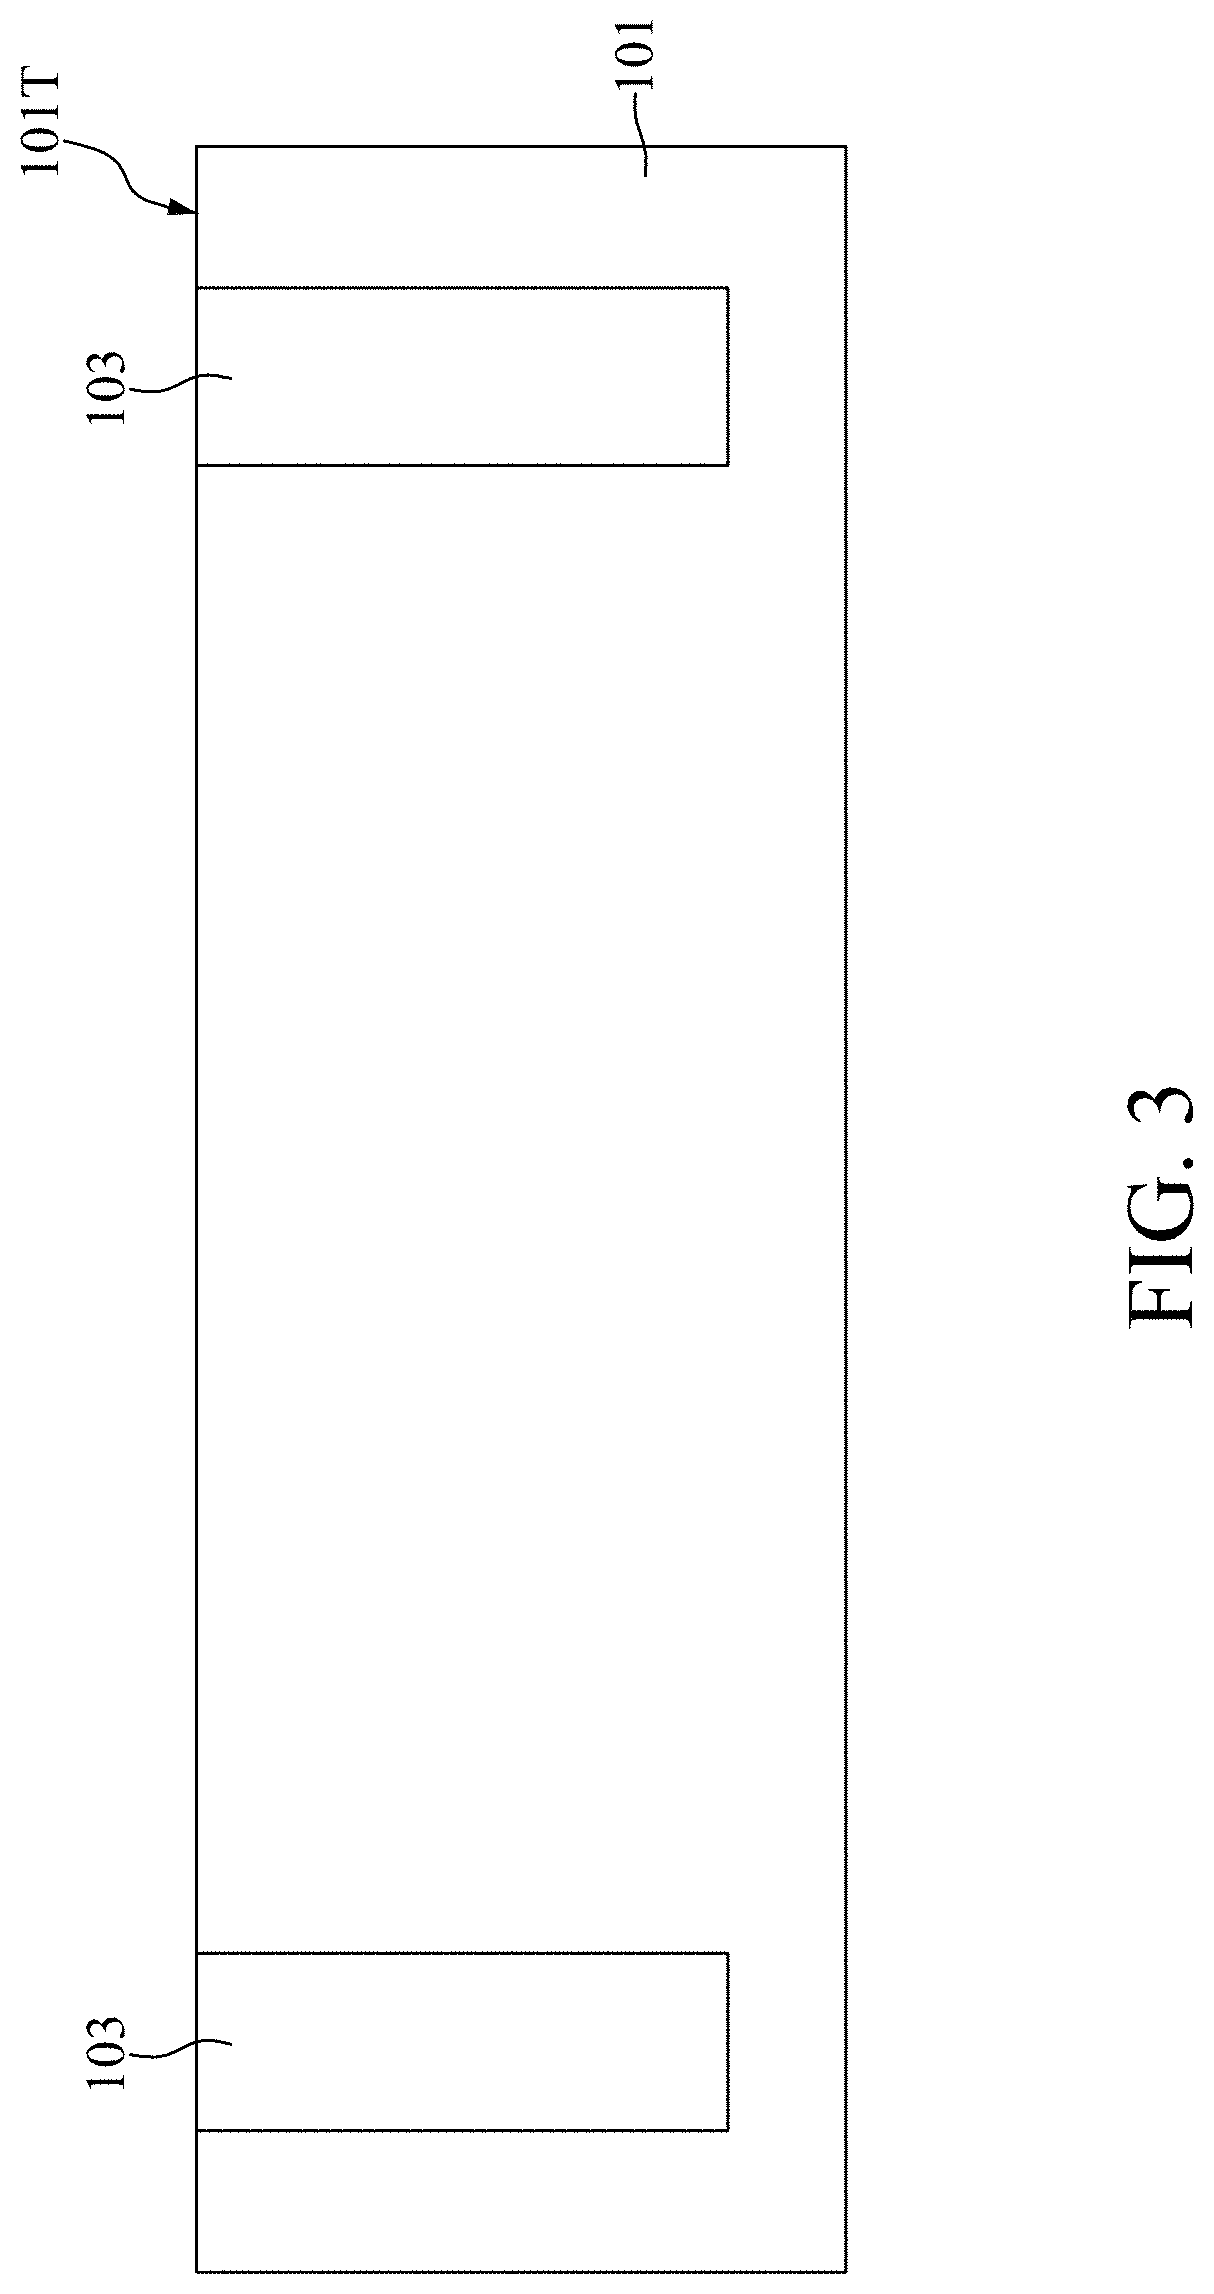 Method for forming semiconductor device with buried gate structure